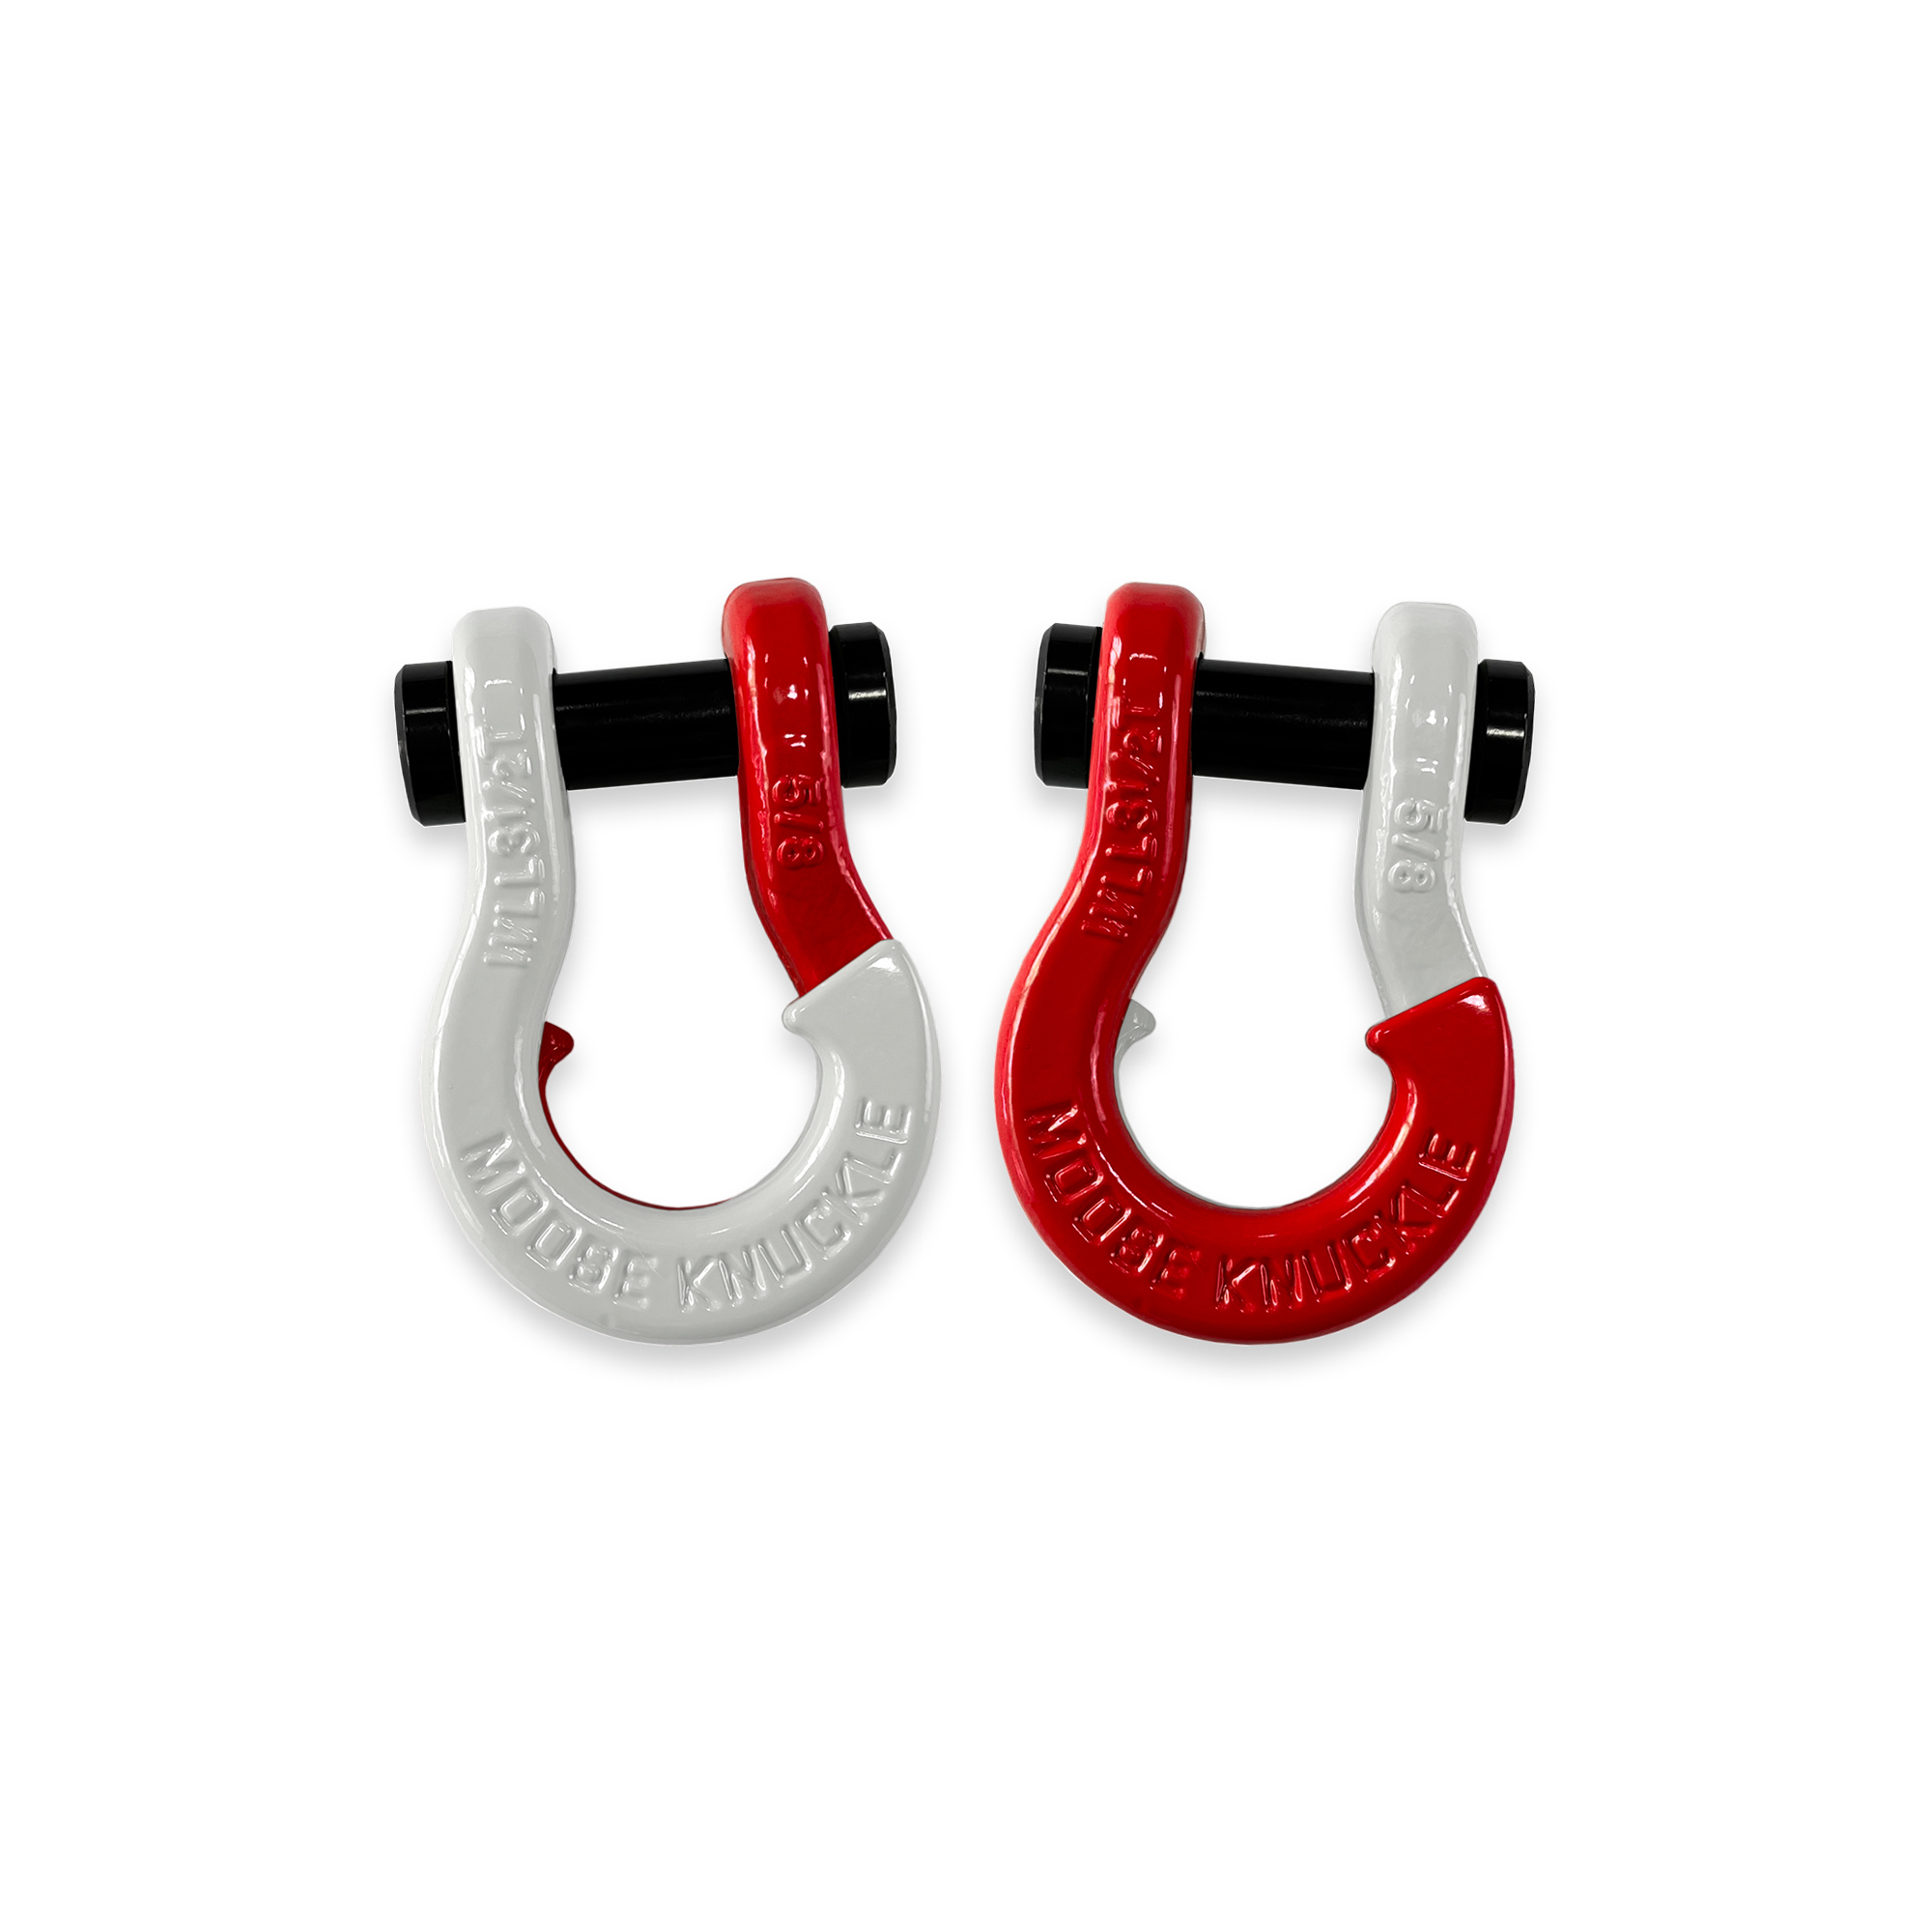 Moose Knuckle Offroad, 5/8 Split Shackle Pure White / Flame Red, Working Load Limit 7000 lb, Model FN000025-048